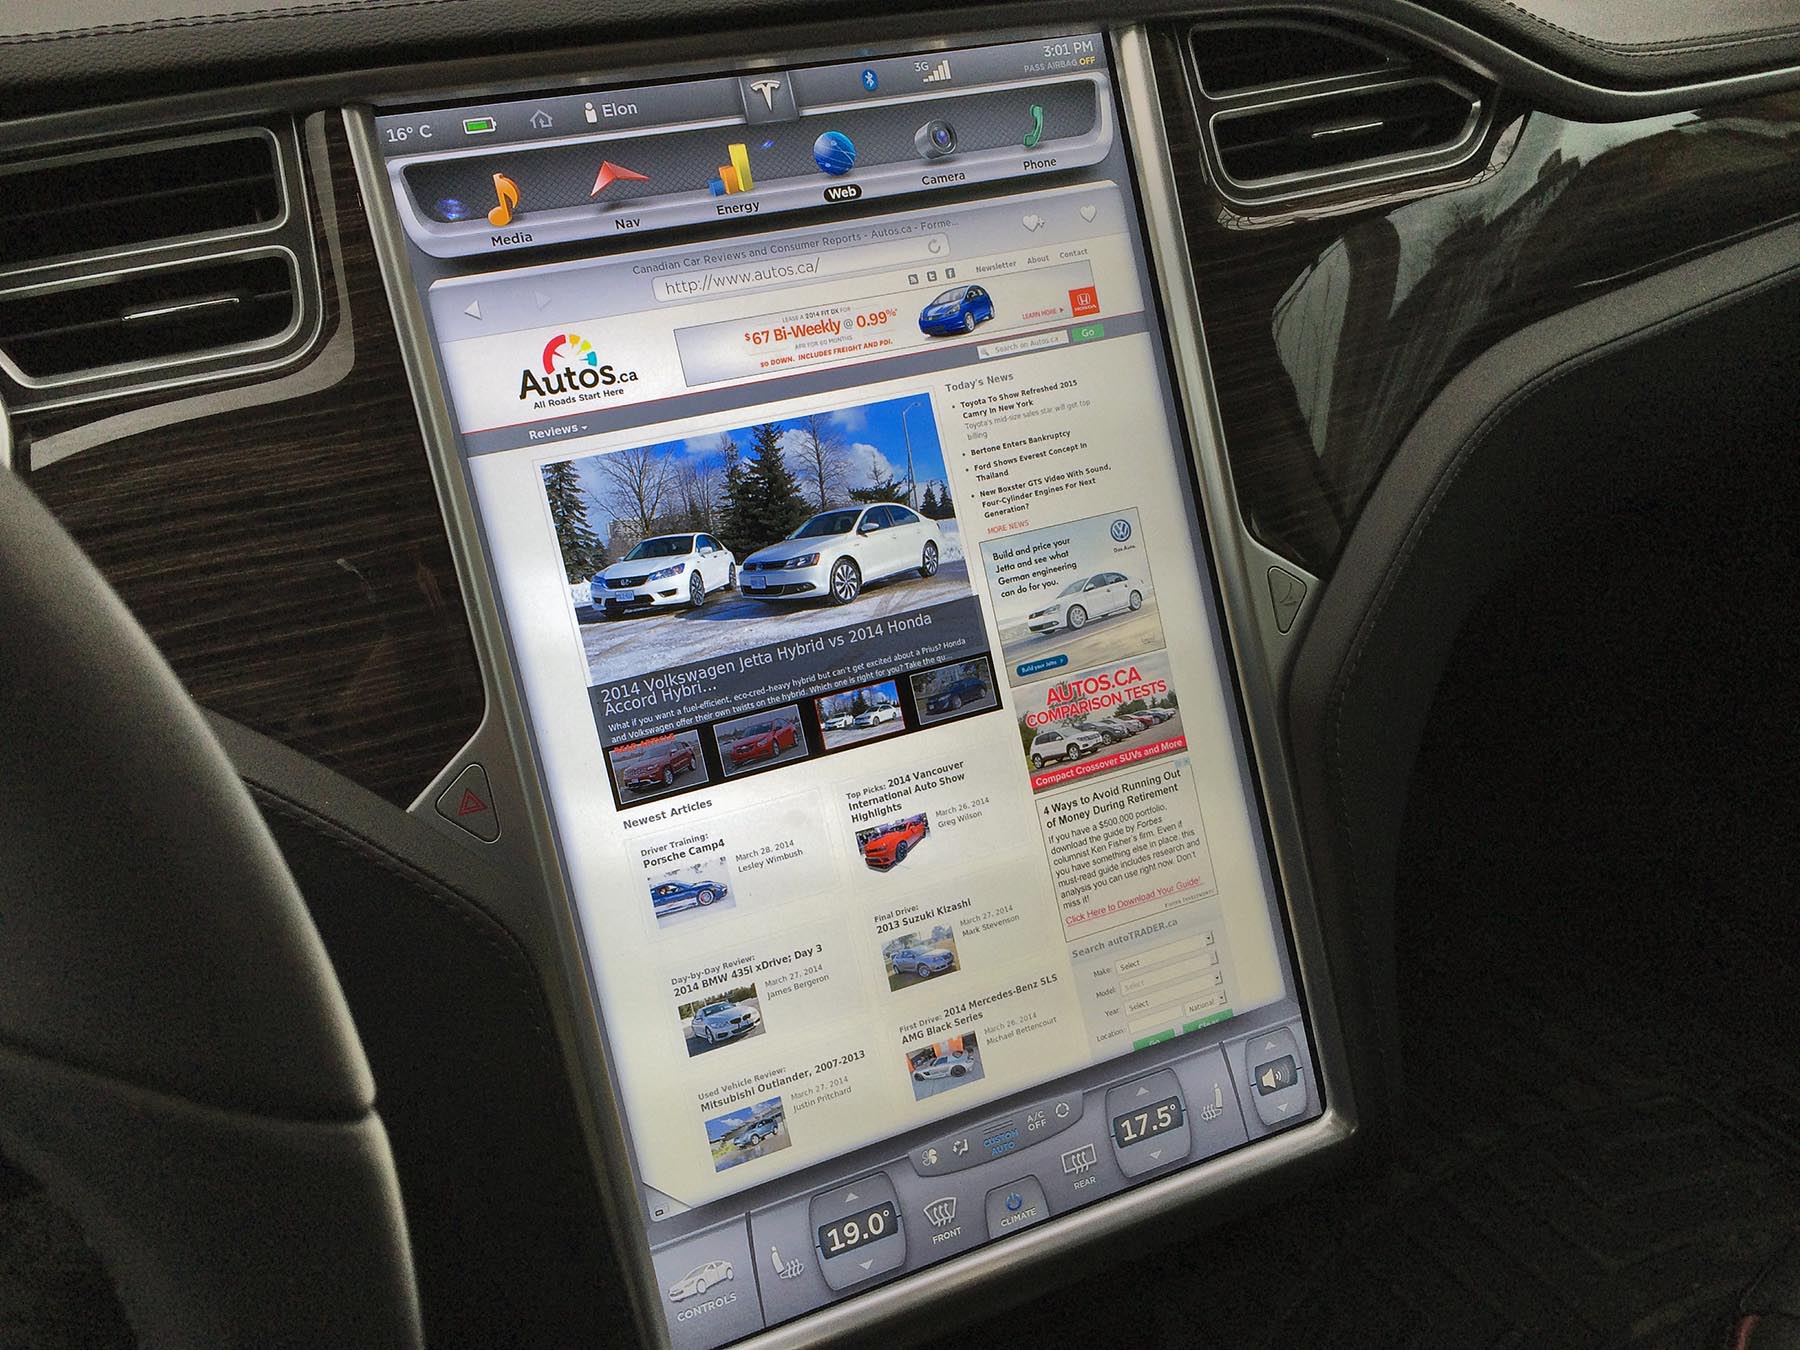 No futuristic cars list would be complete without the Tesla Model S, the car The Oatmeal calls his “Intergalactic SpaceBoat of Light and Wonder”. Knobs and buttons are a thing of the past, and almost all interior functions are controlled via a giant 17-inch customizable touchscreen. Yeah, pretty rad.